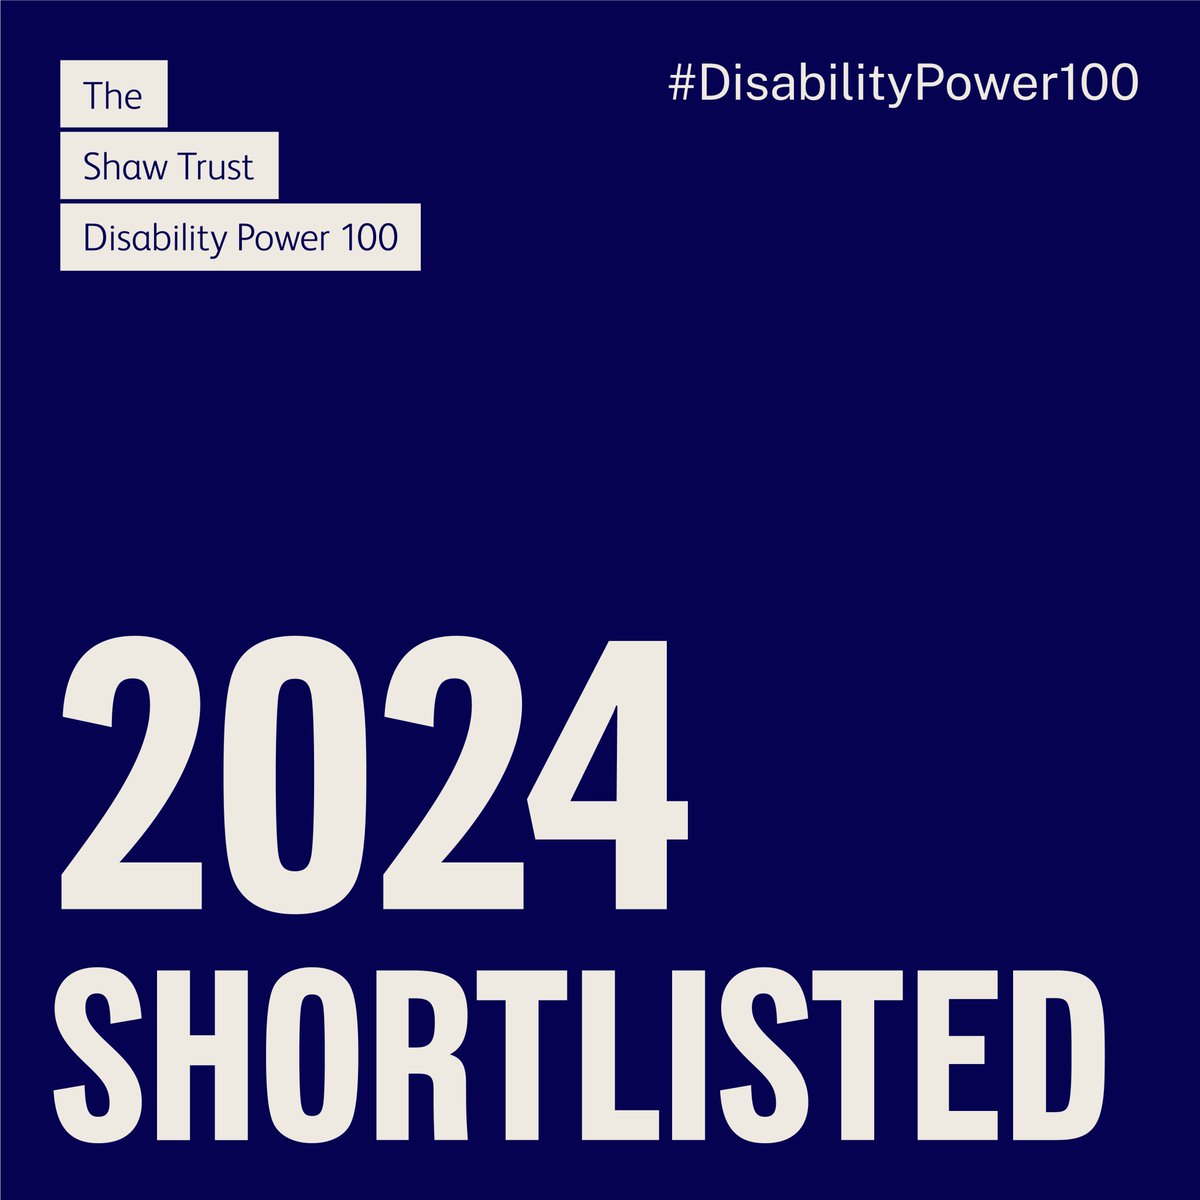 Wow. Just got an email saying I've been shortlisted for The Shaw Trust  #DisabilityPower100 this year. What a lovely surprise🚀